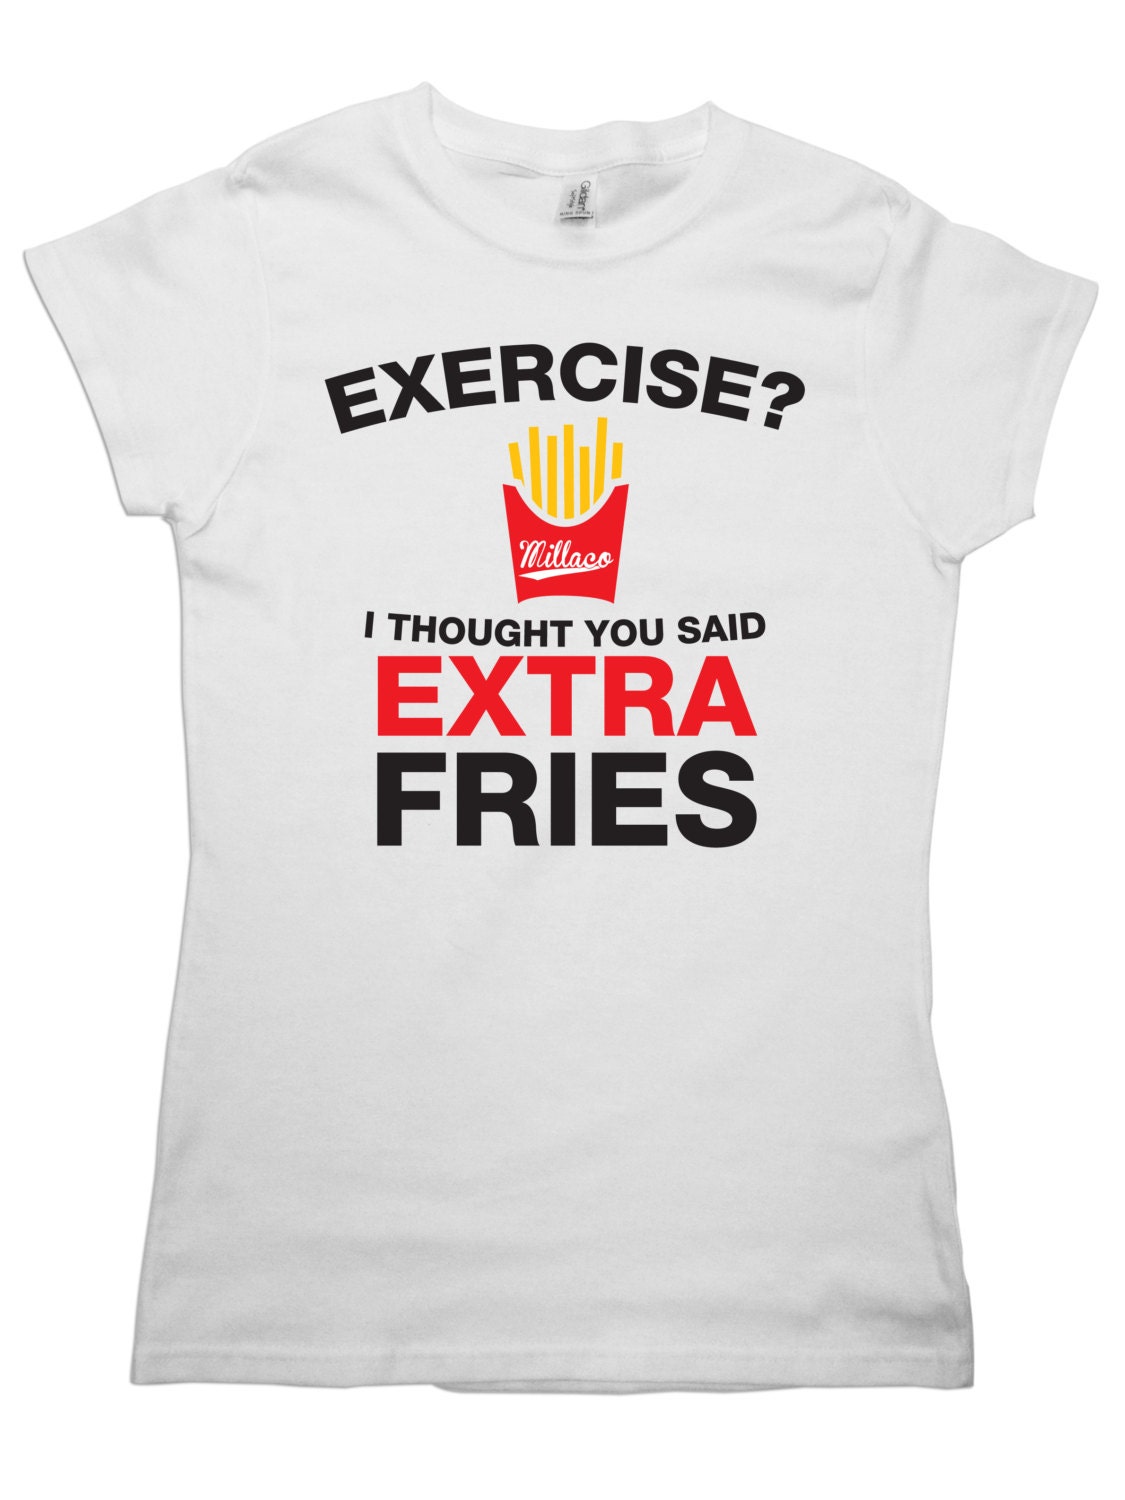 Exercise Thought You Said Extra Fries Women's T-Shirt. by Millaco